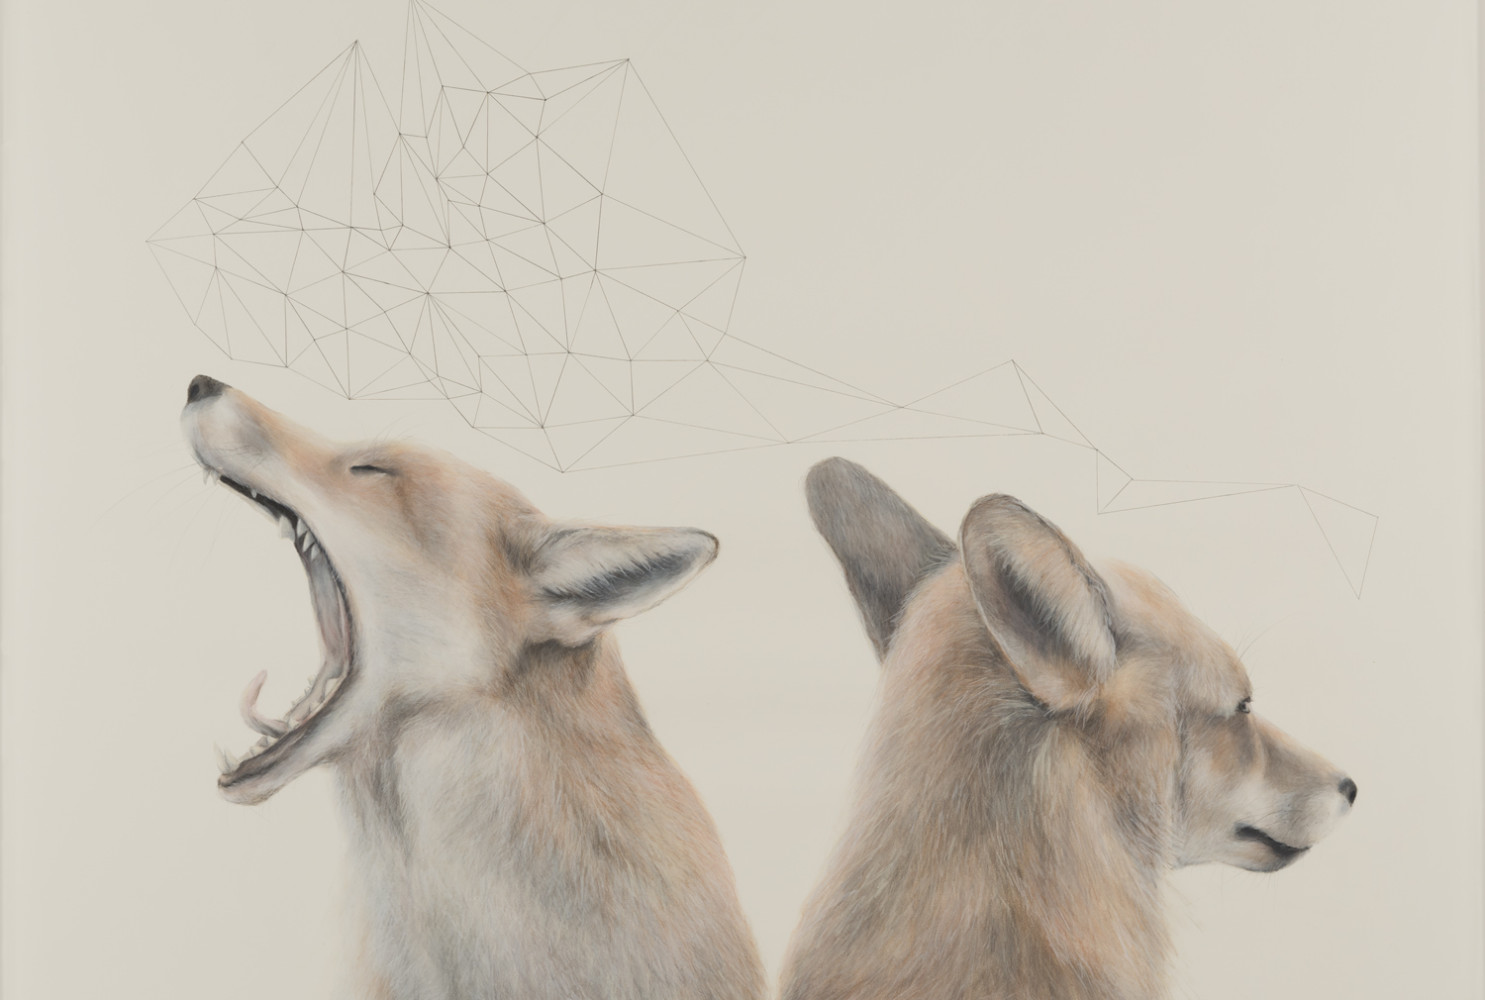 JenMarie Zeleznak  (United States, b. 1984). Constant Cycles Strung Together, 2014. Watercolor and graphite pencil on paper. 35 × 44 1/4 inches. Gift of the 2015 Blacktail Gala, National Museum of Wildlife Art. © JenMarie Zeleznak . M2015.005.004